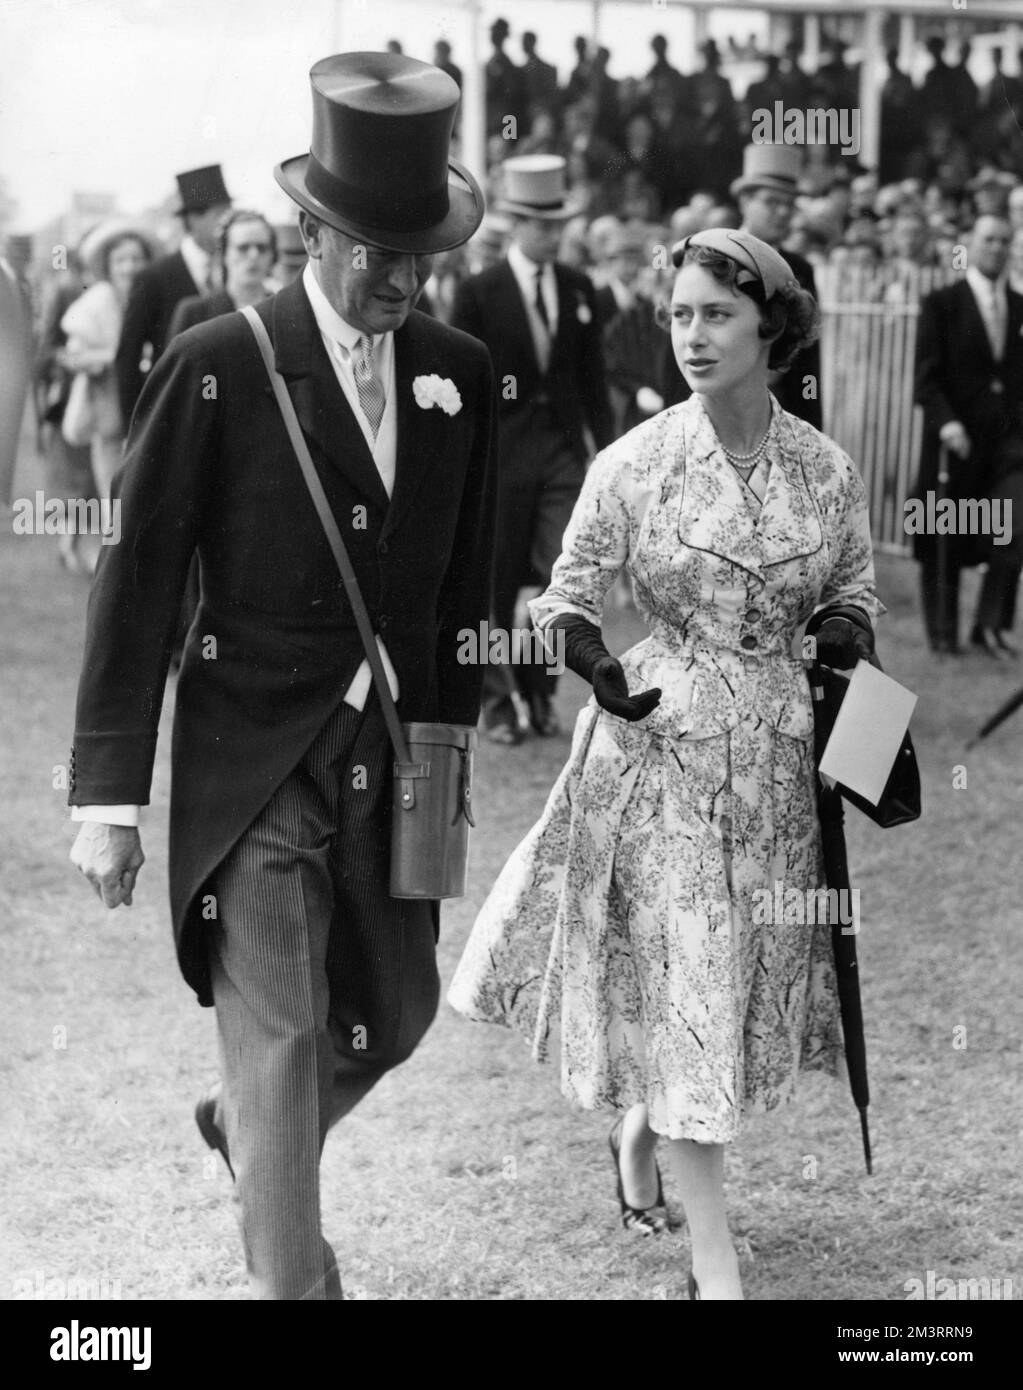 Princess Margaret at the Epsom Derby, walking the course with other members of the royal family.       Date: 1955 Stock Photo